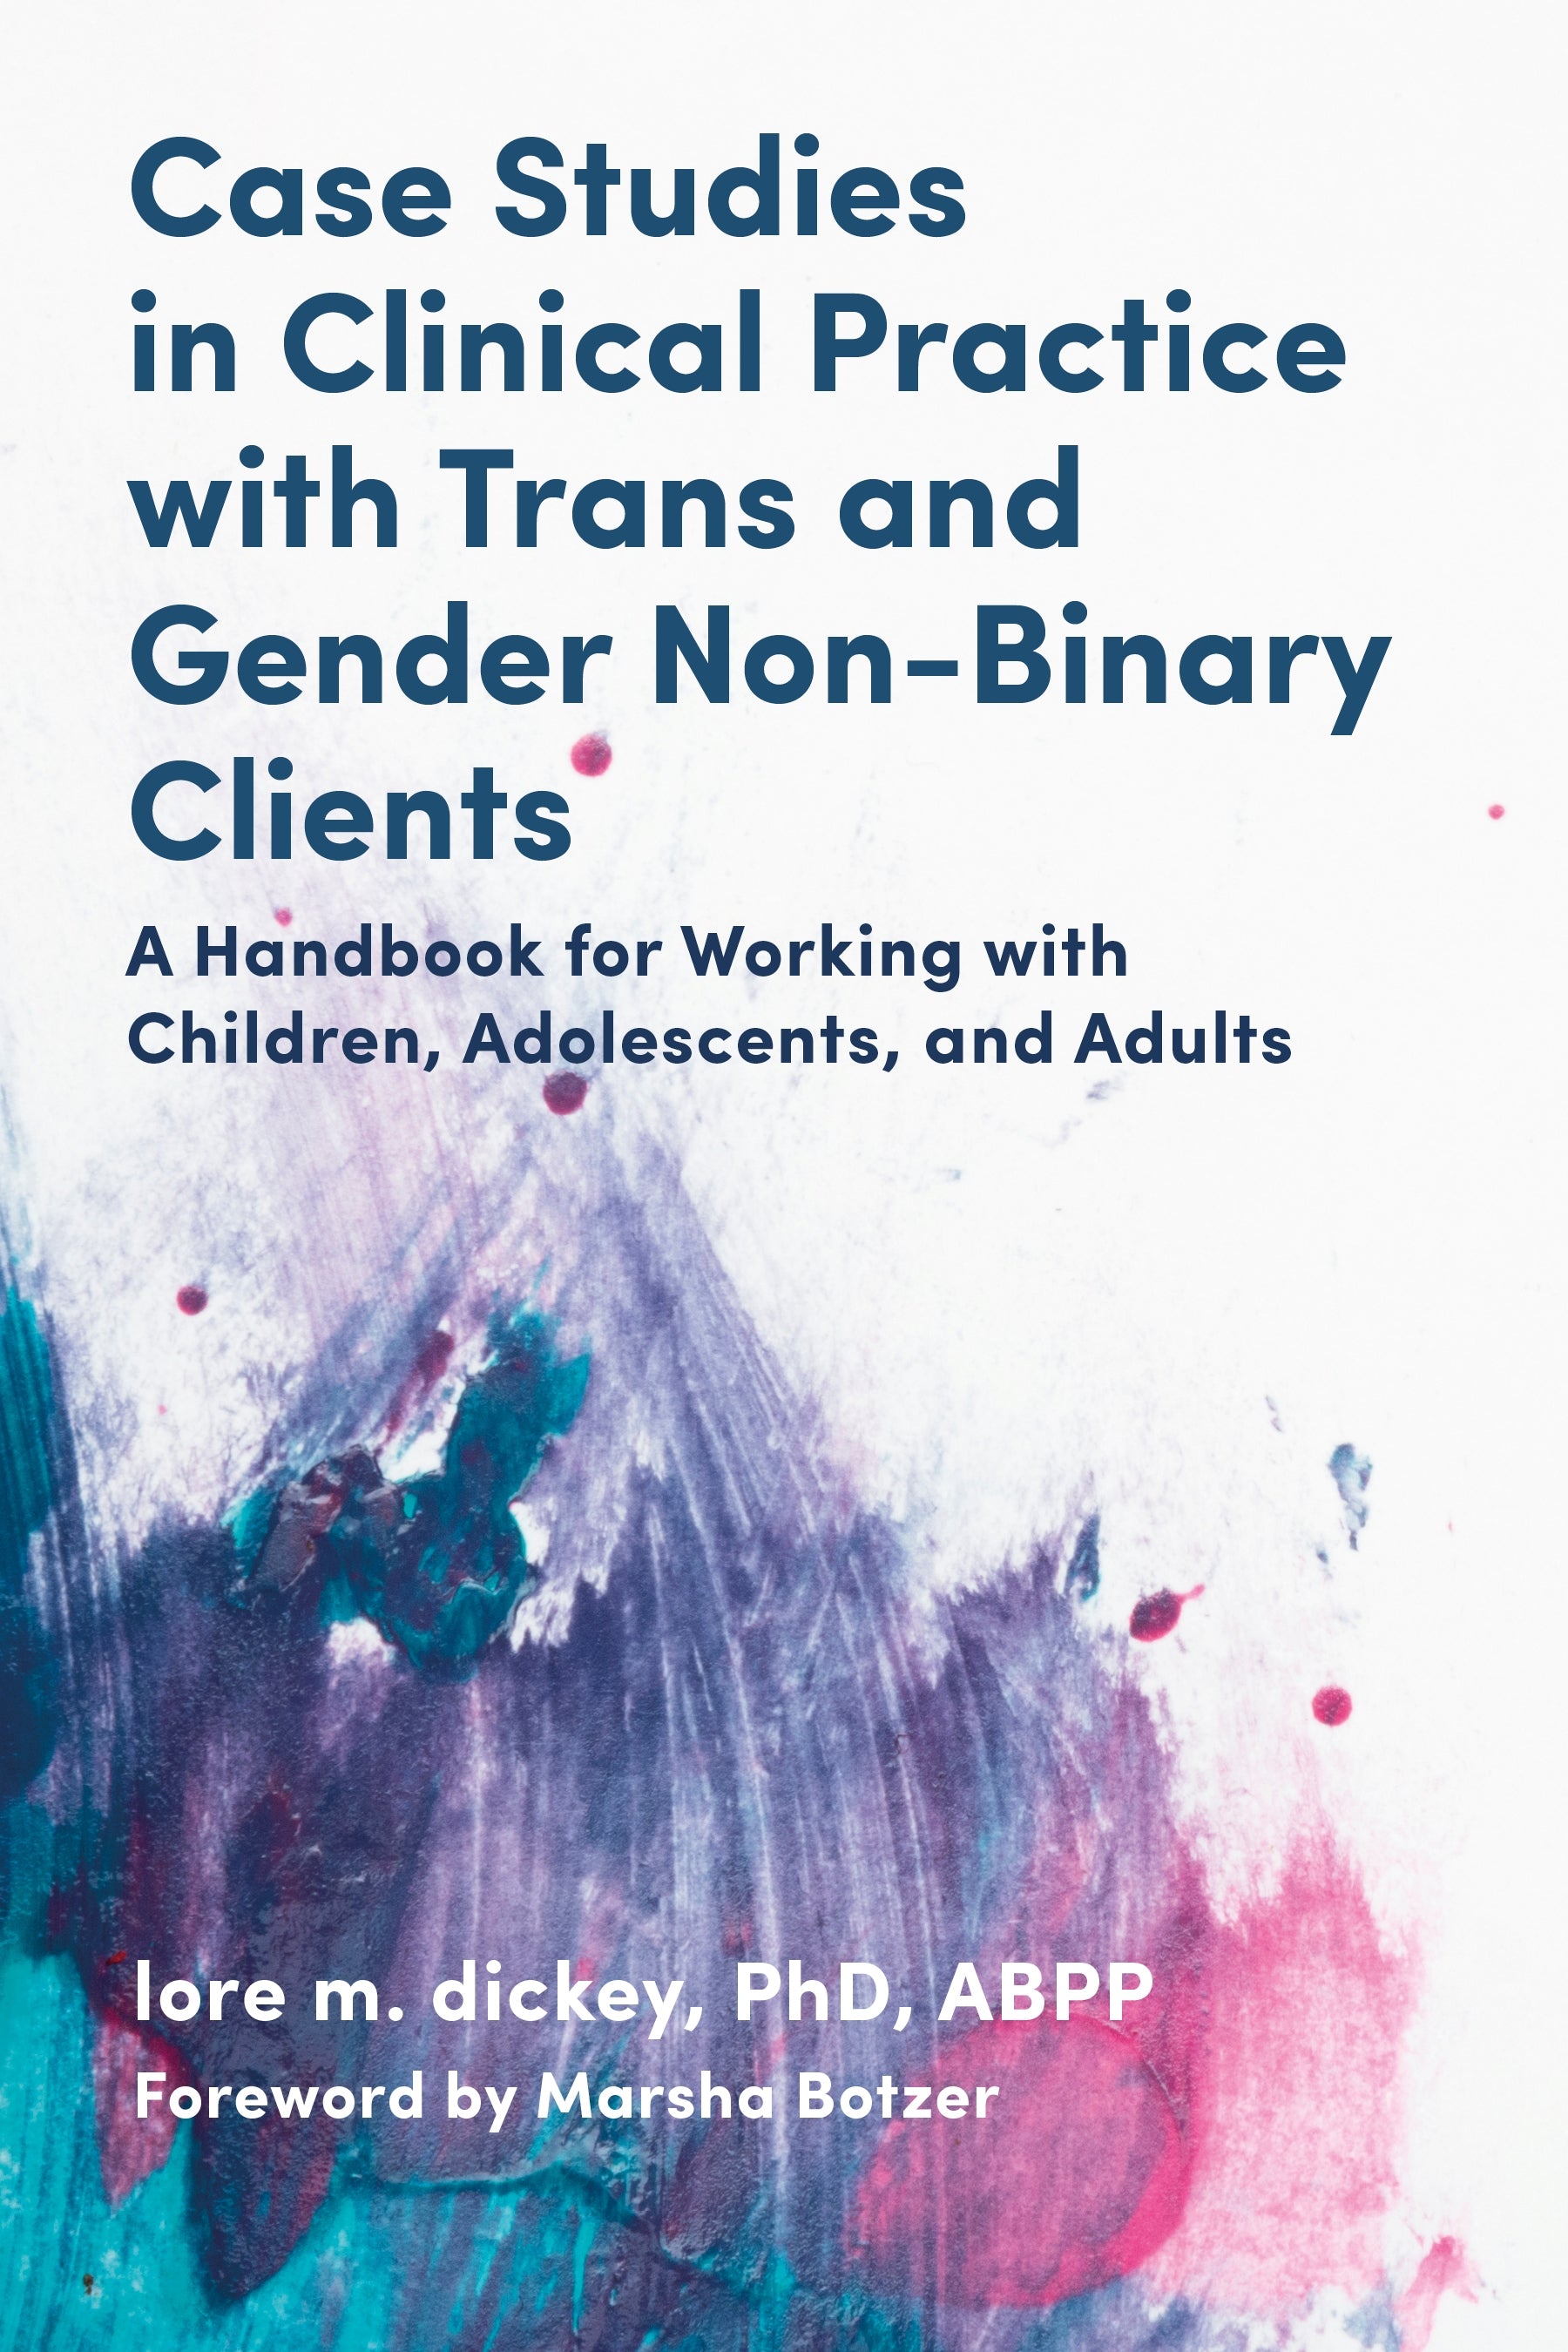 Case Studies in Clinical Practice with Trans and Gender Non-Binary Clients by lore m. dickey, Marsha Botzer